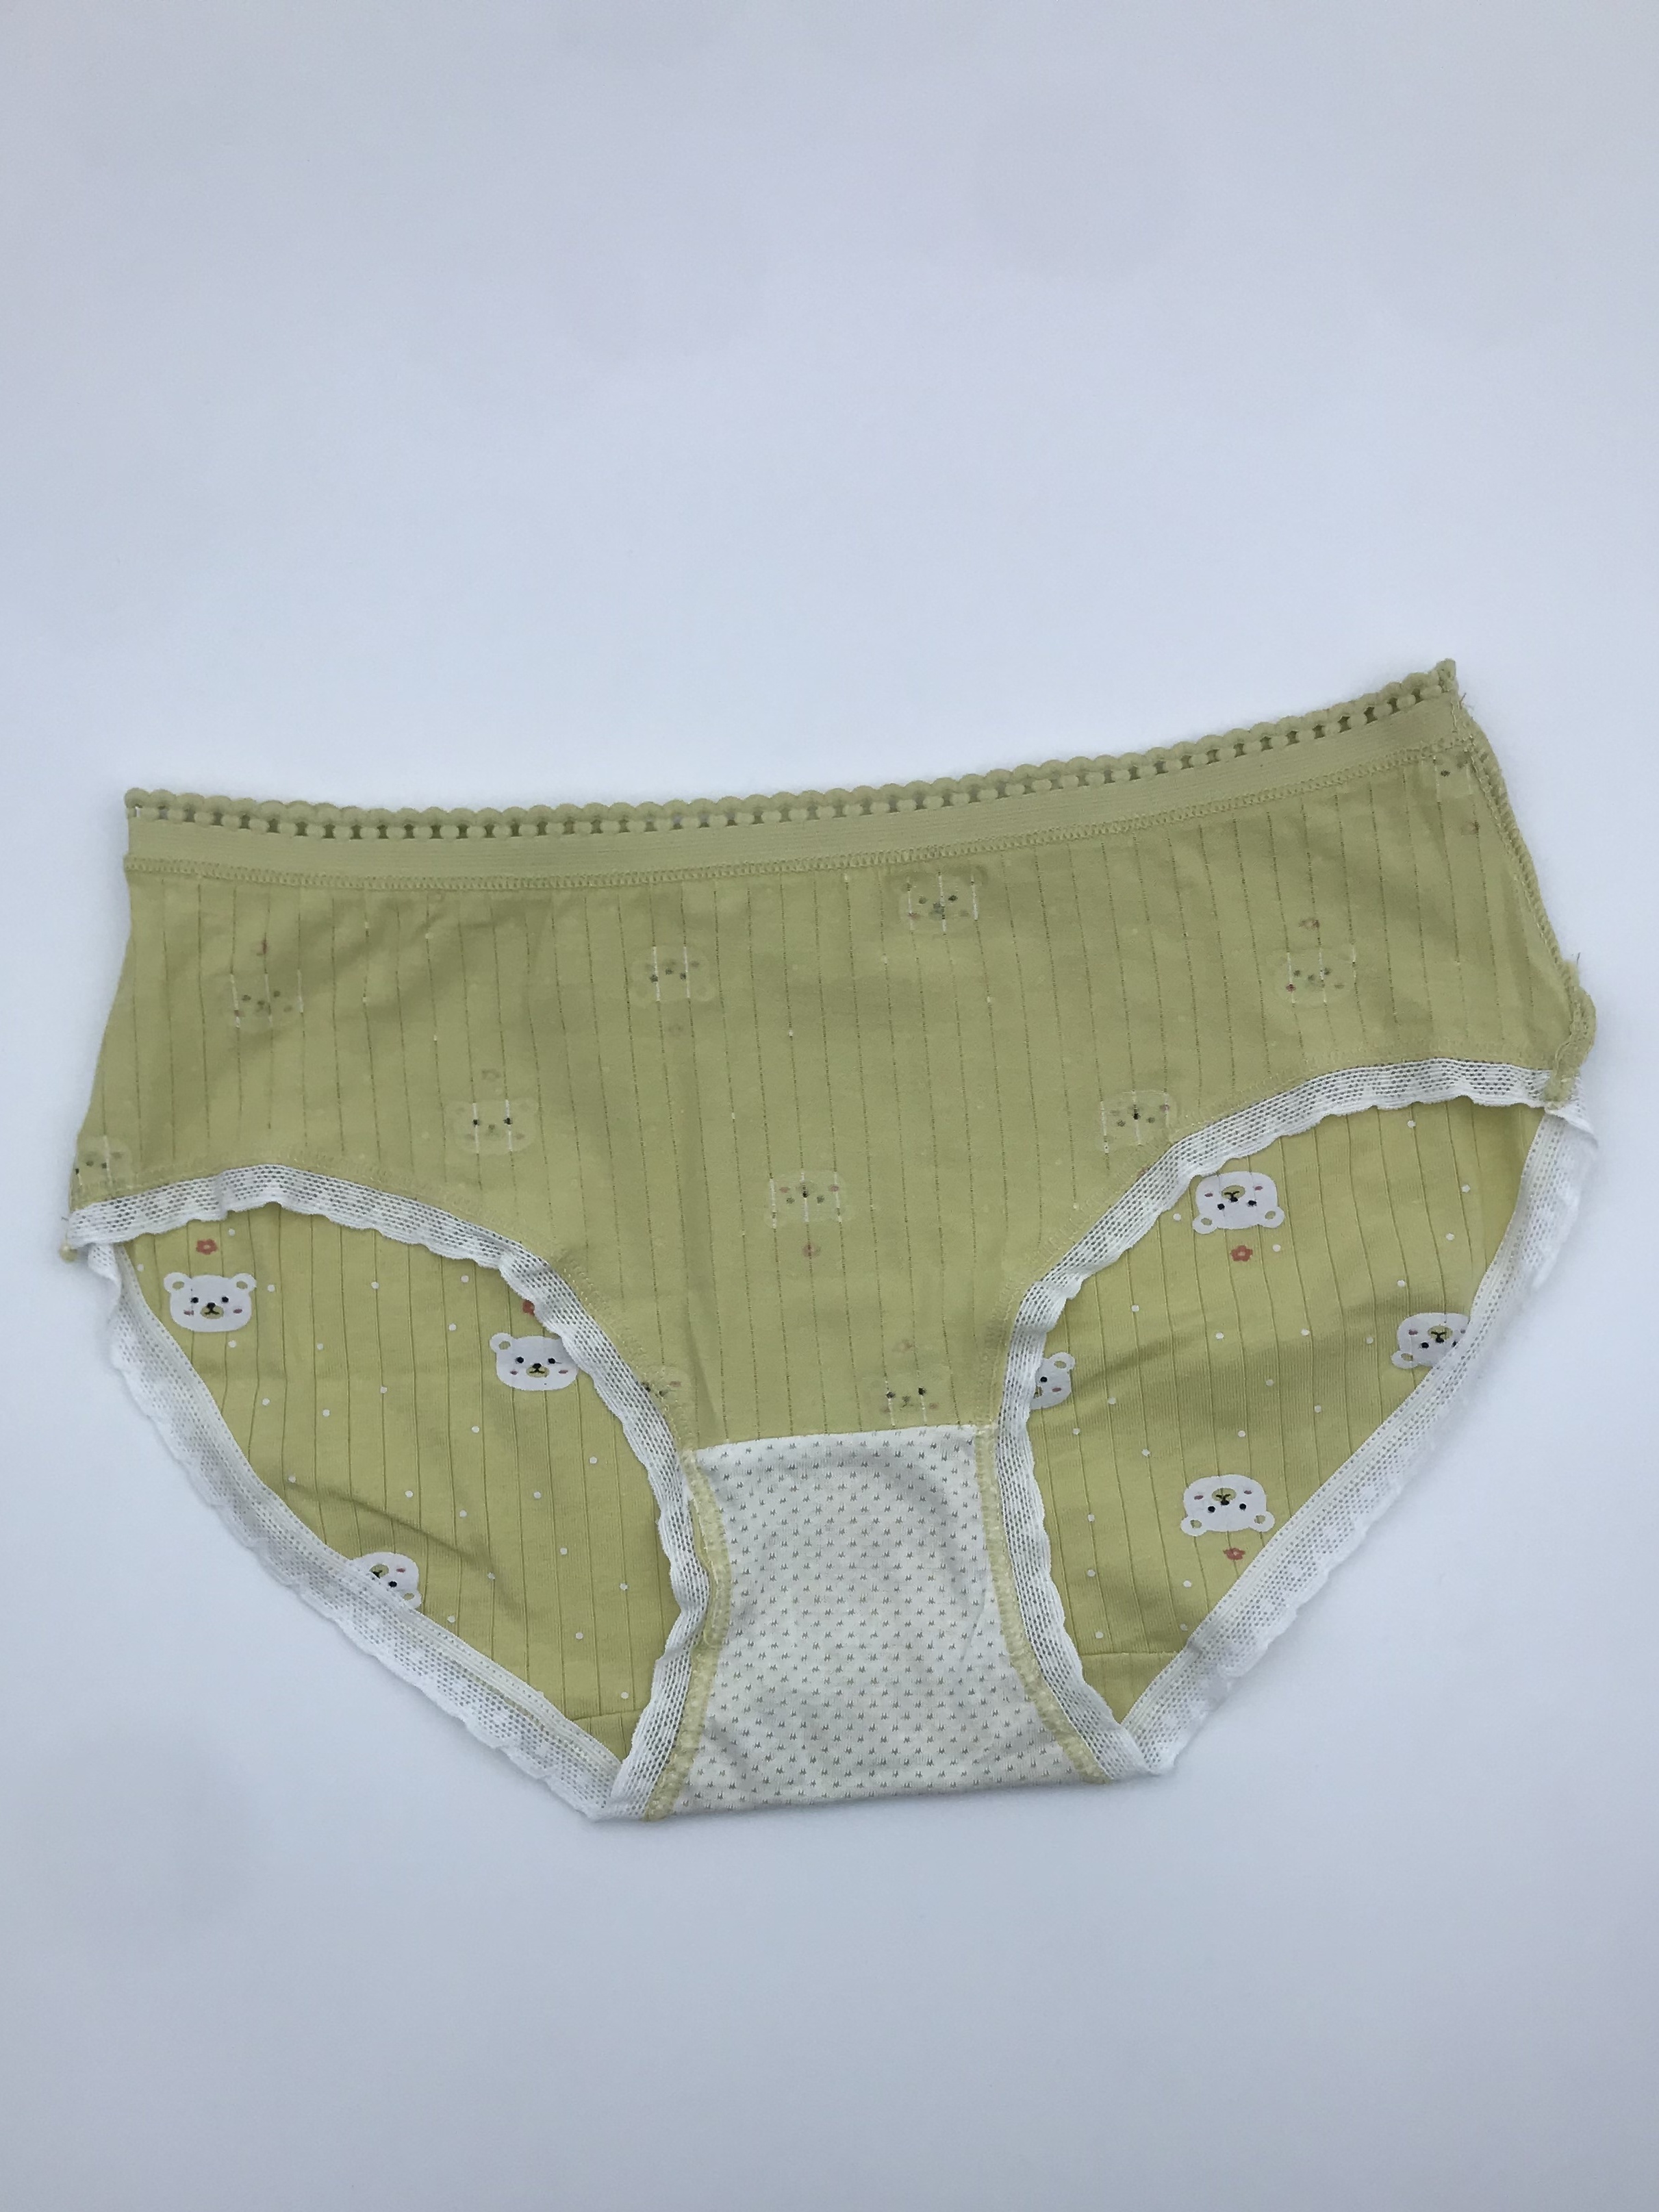 Find Crane Underwear For Ultimate Comfort And Cuteness 